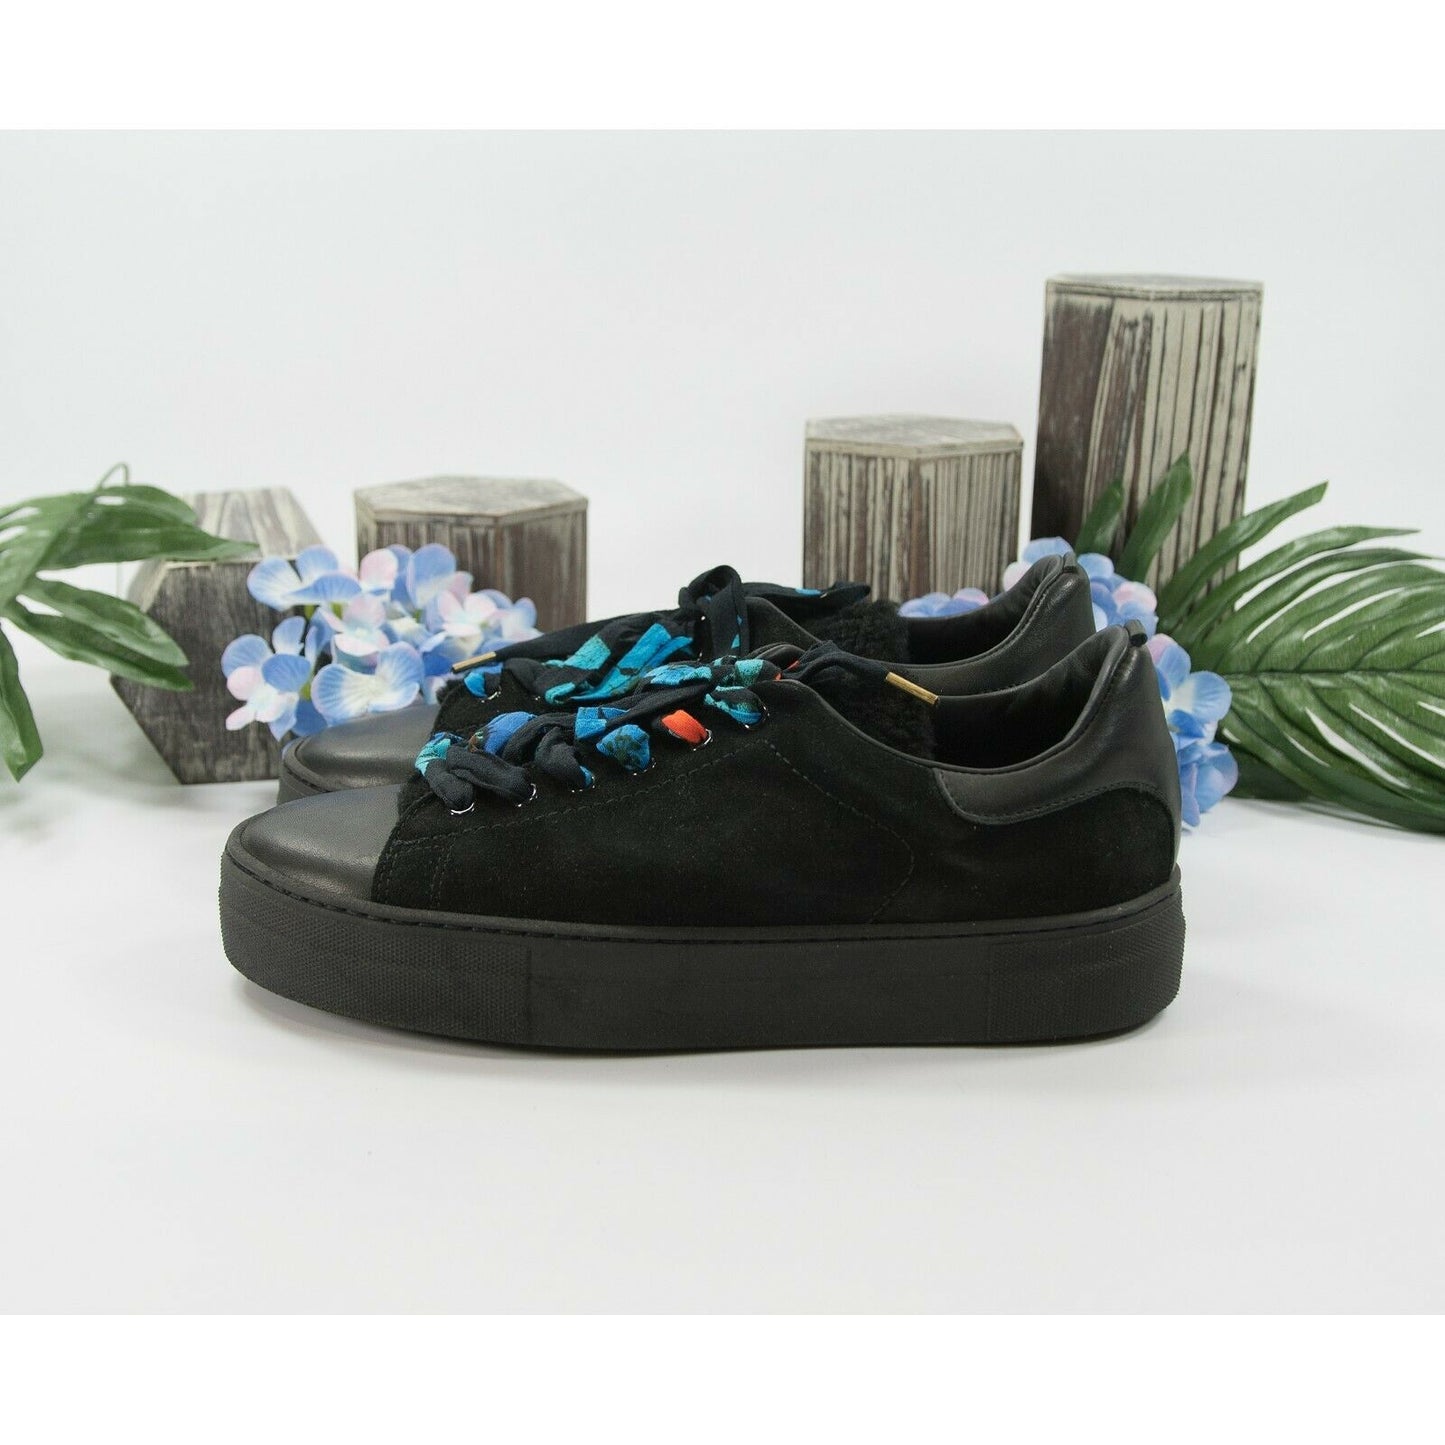 Maje Black Suede Shearling Ribbon Lace Up Sneakers Shoes Sz 40 10 NWOB